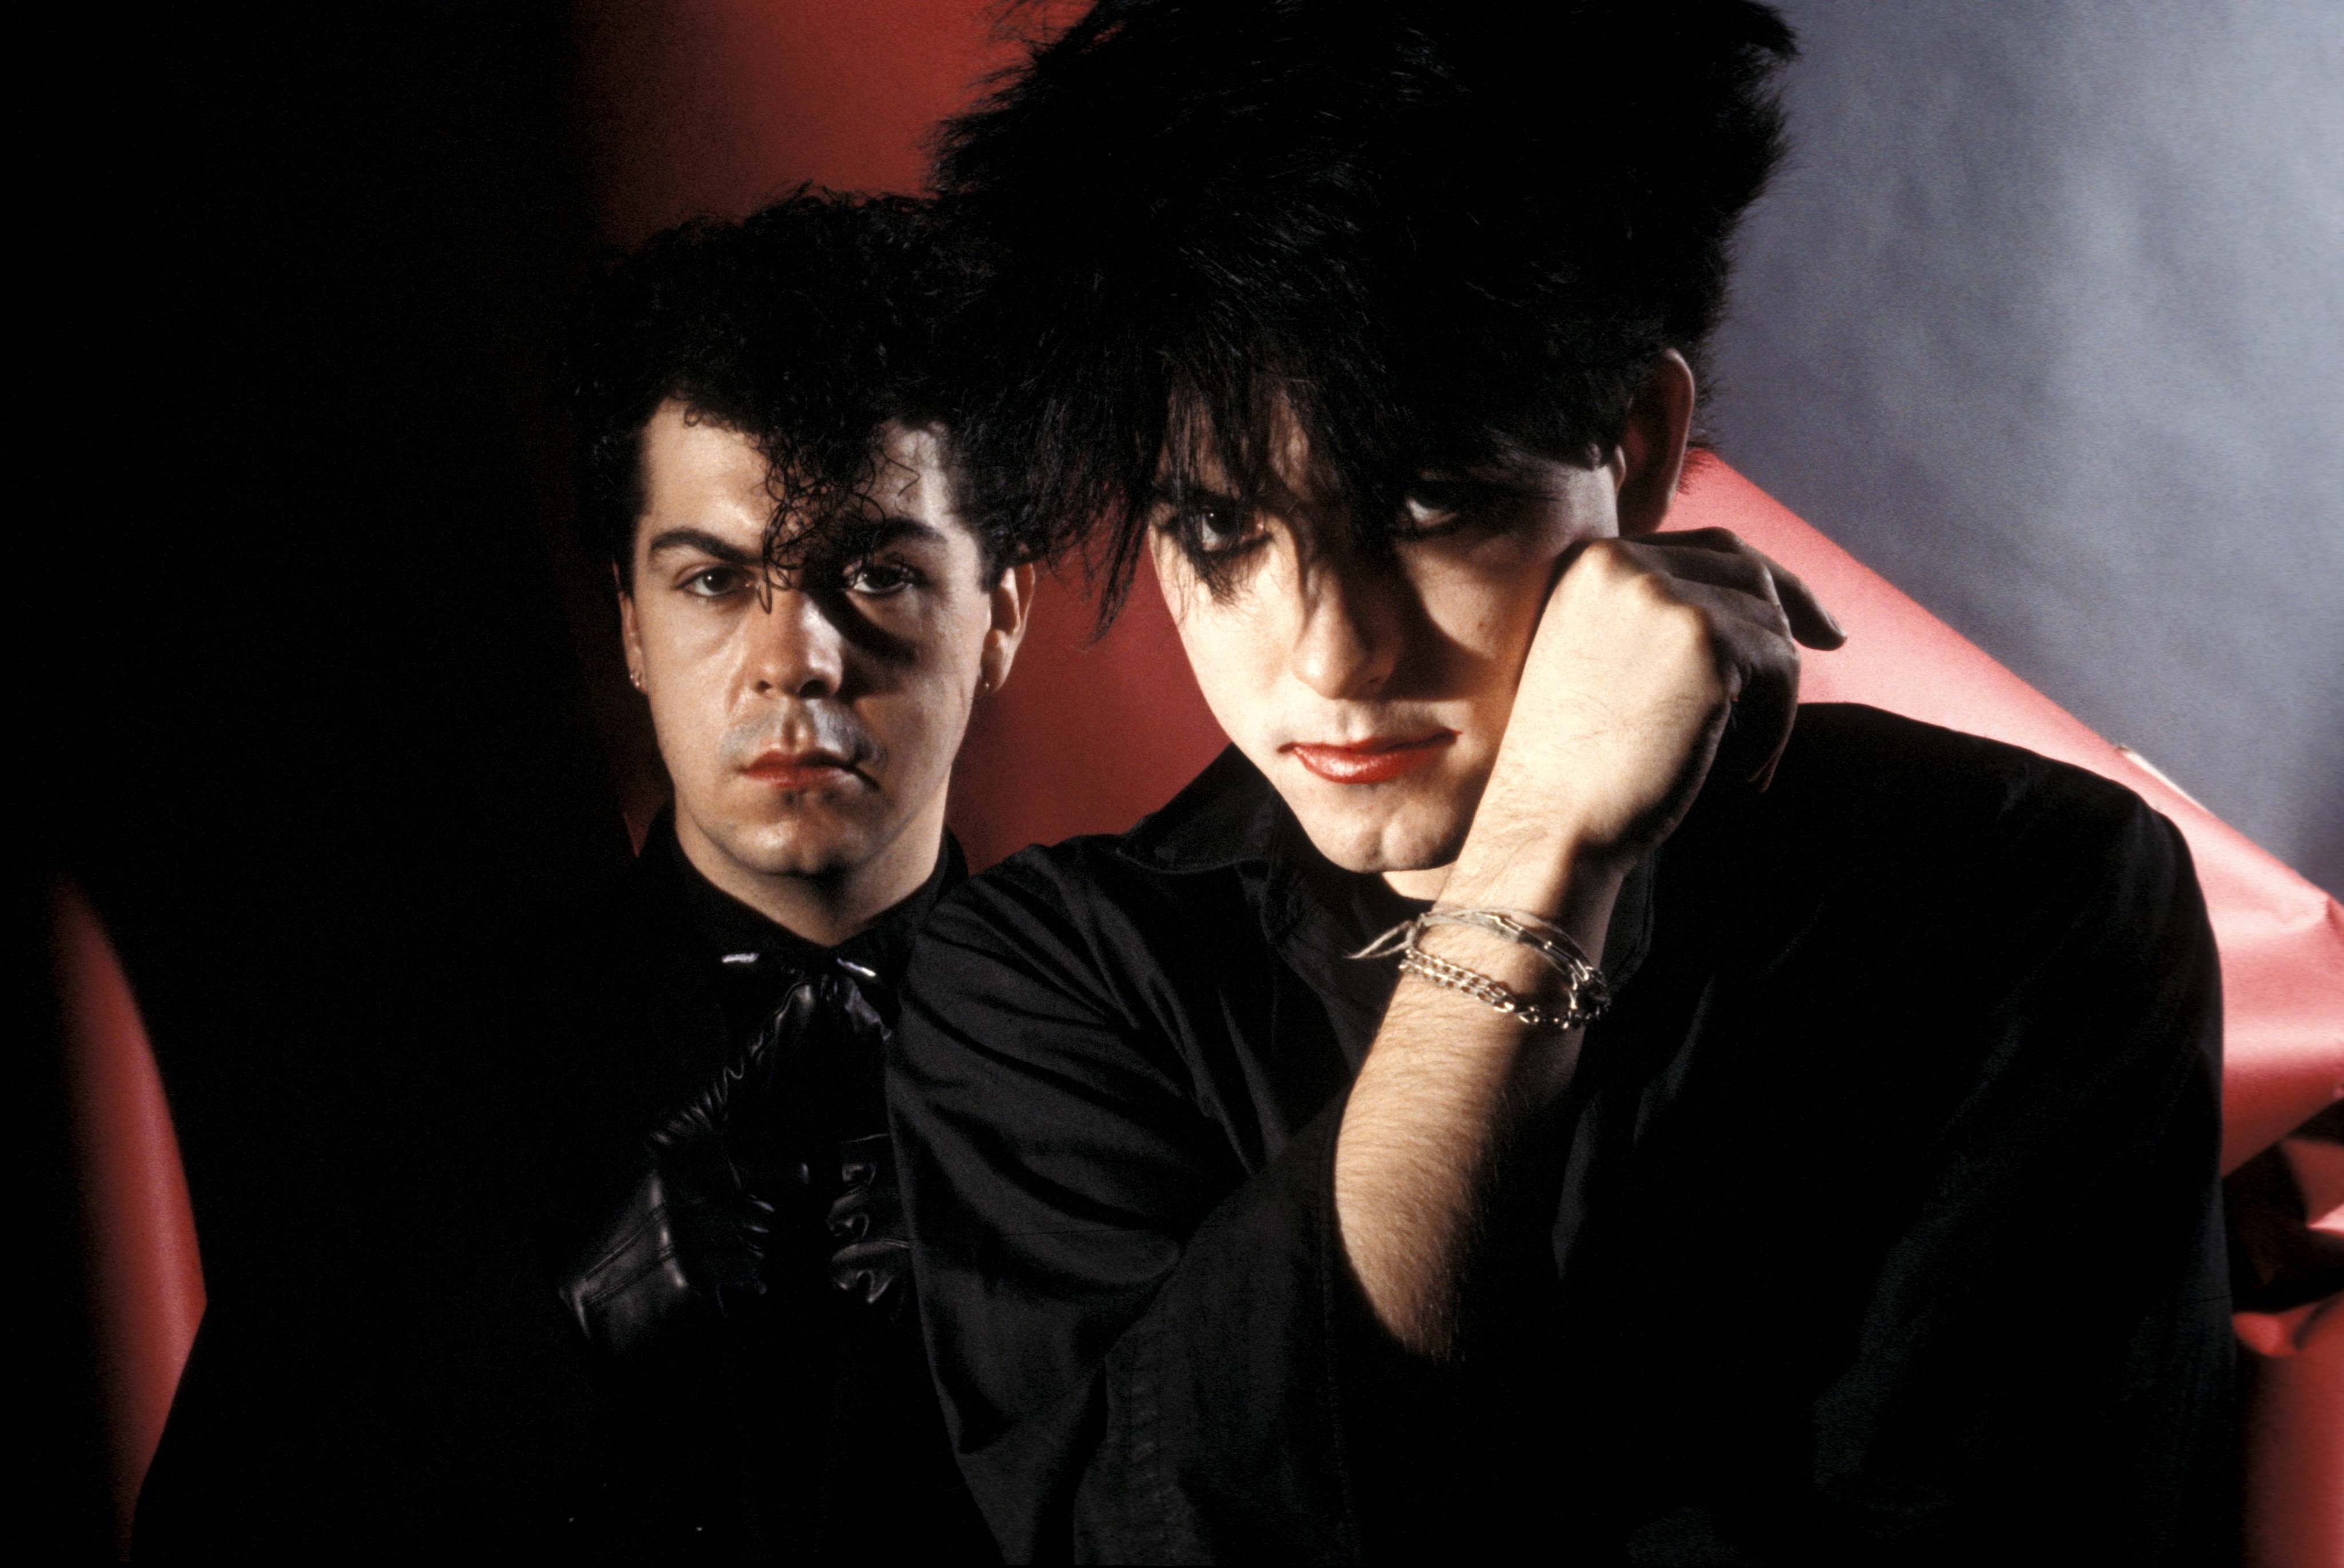 Lol Tolhurst (left) and Robert Smith of The Cure in 1983. Tolhurst traces the often-misunderstood goth subculture, from its fashion and music to links with Catholicism, in his new book “Goth: A History”. Photo: Shutterstock